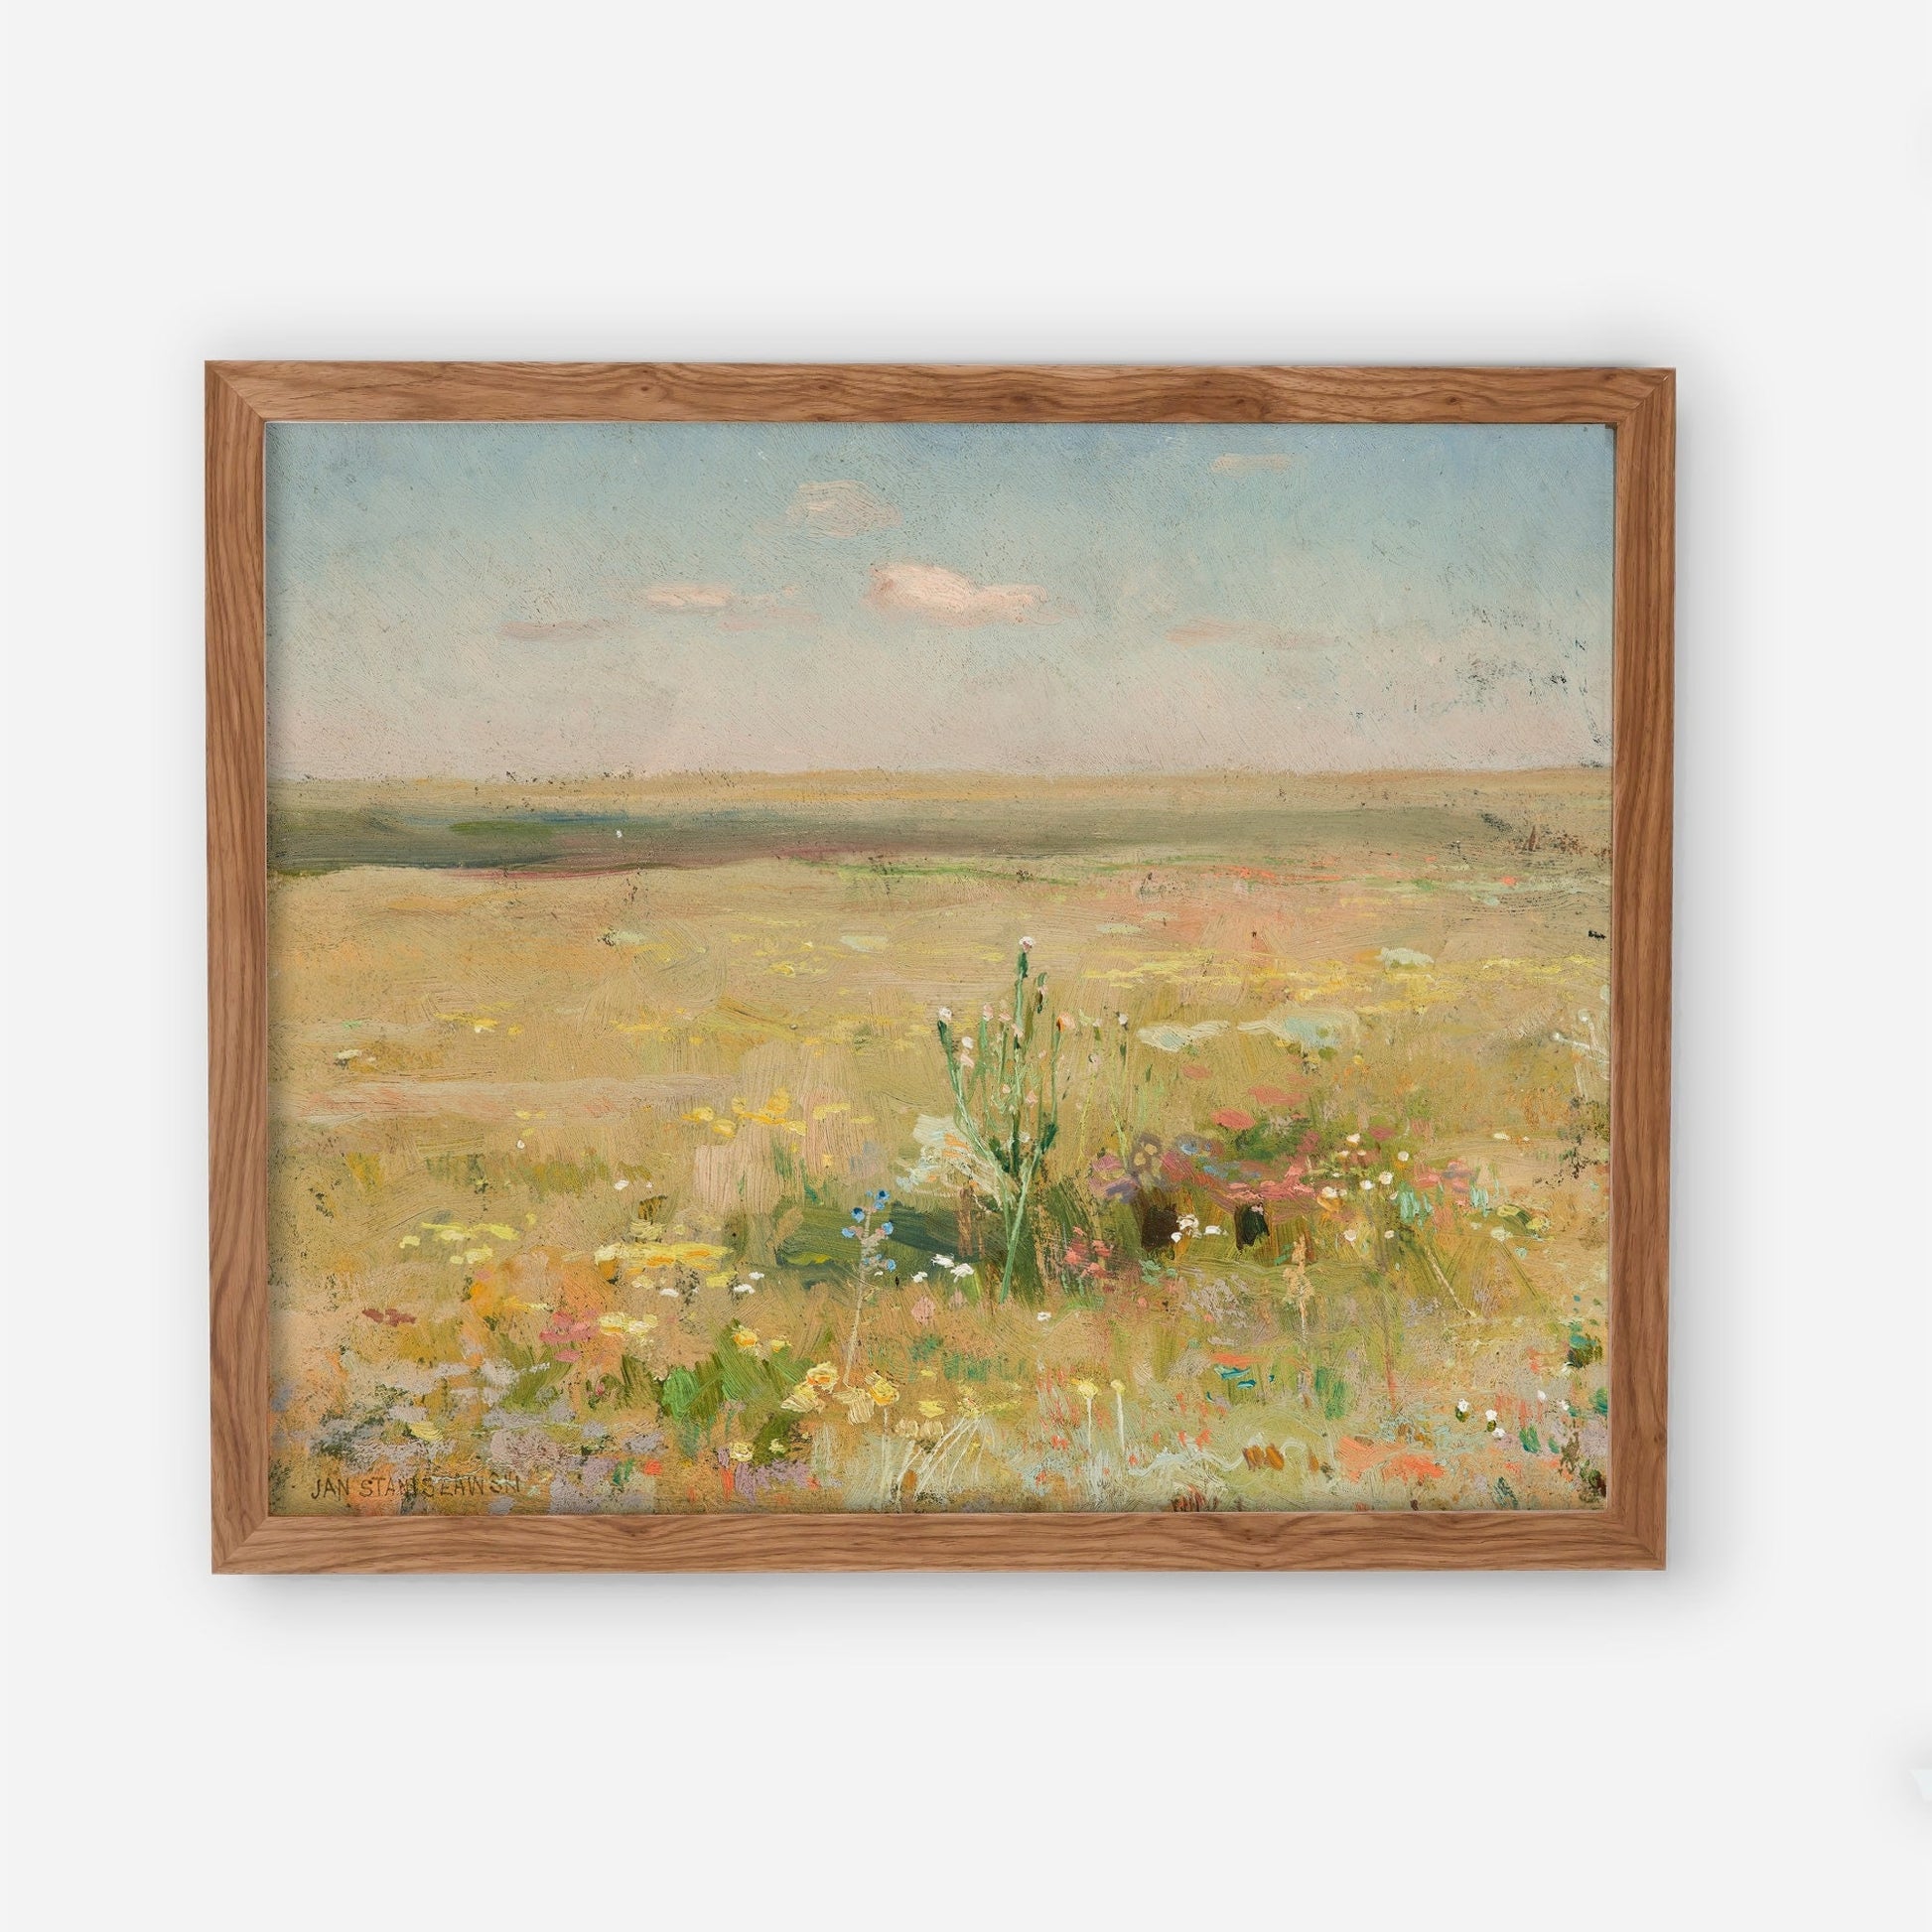 Landscape Vintage and Sketches Gallery Wall Art 